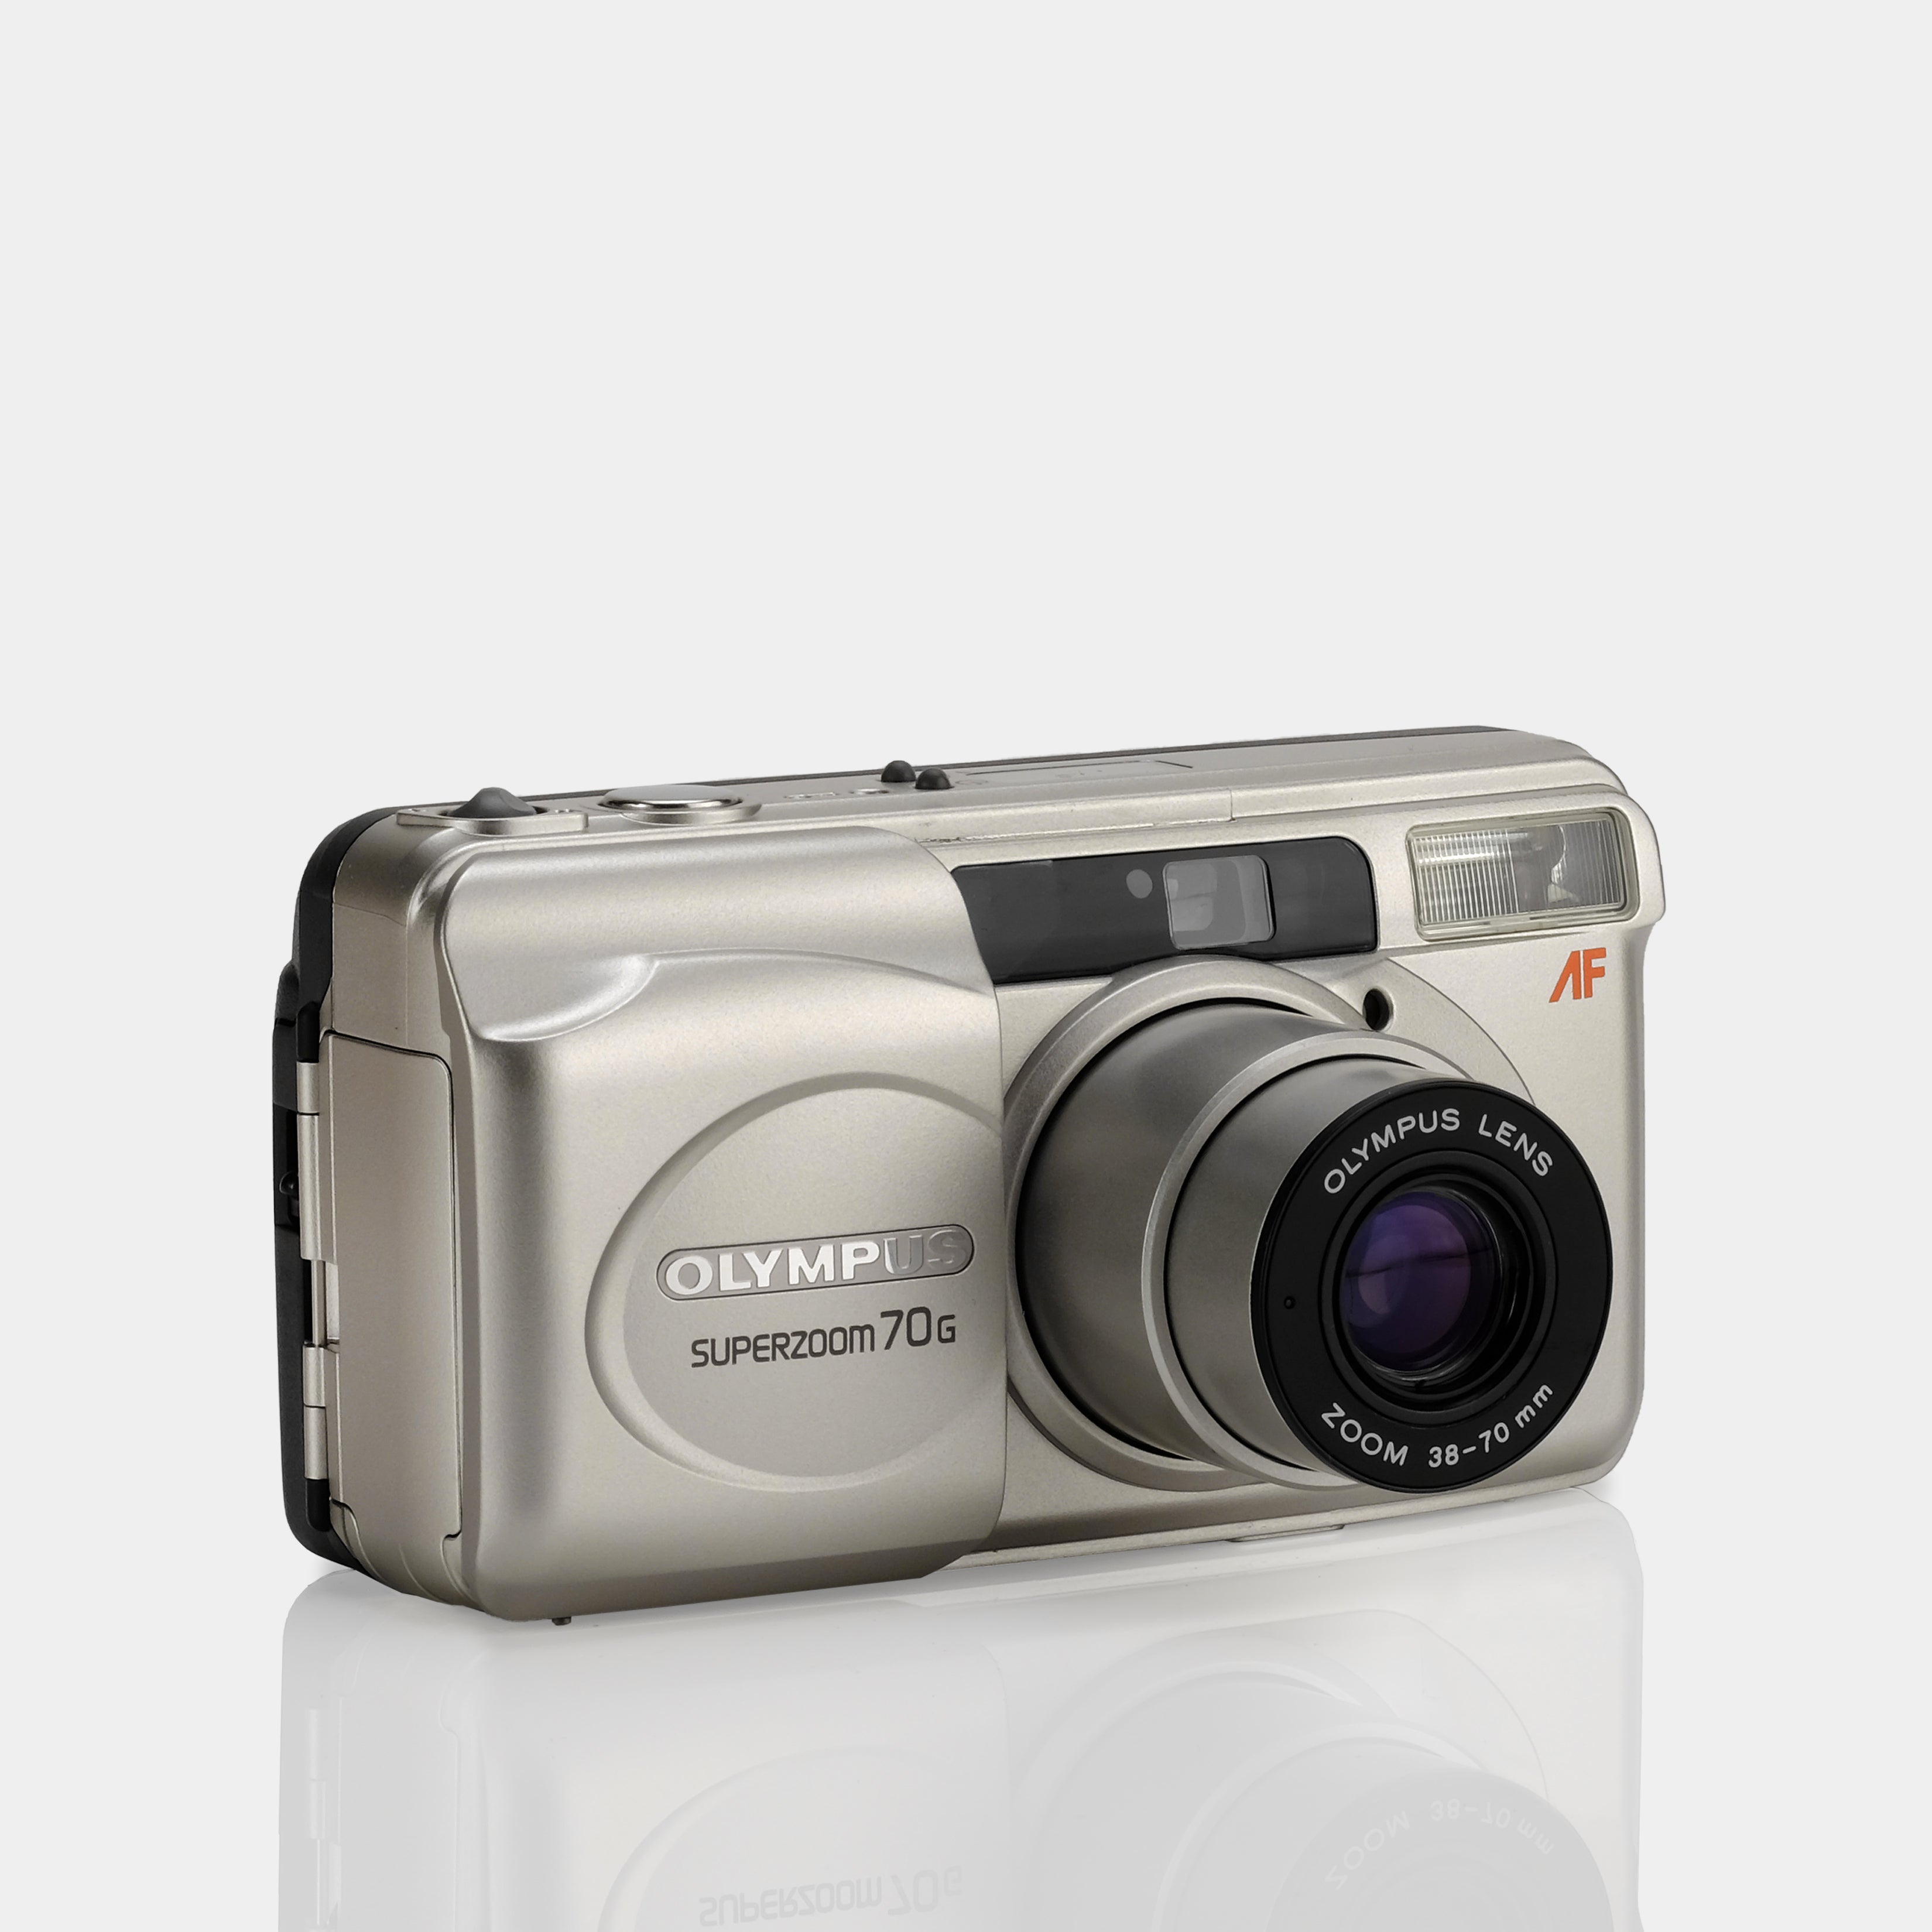 Olympus Superzoom 70G 35mm Point And Shoot Film Camera (New Old Stock)